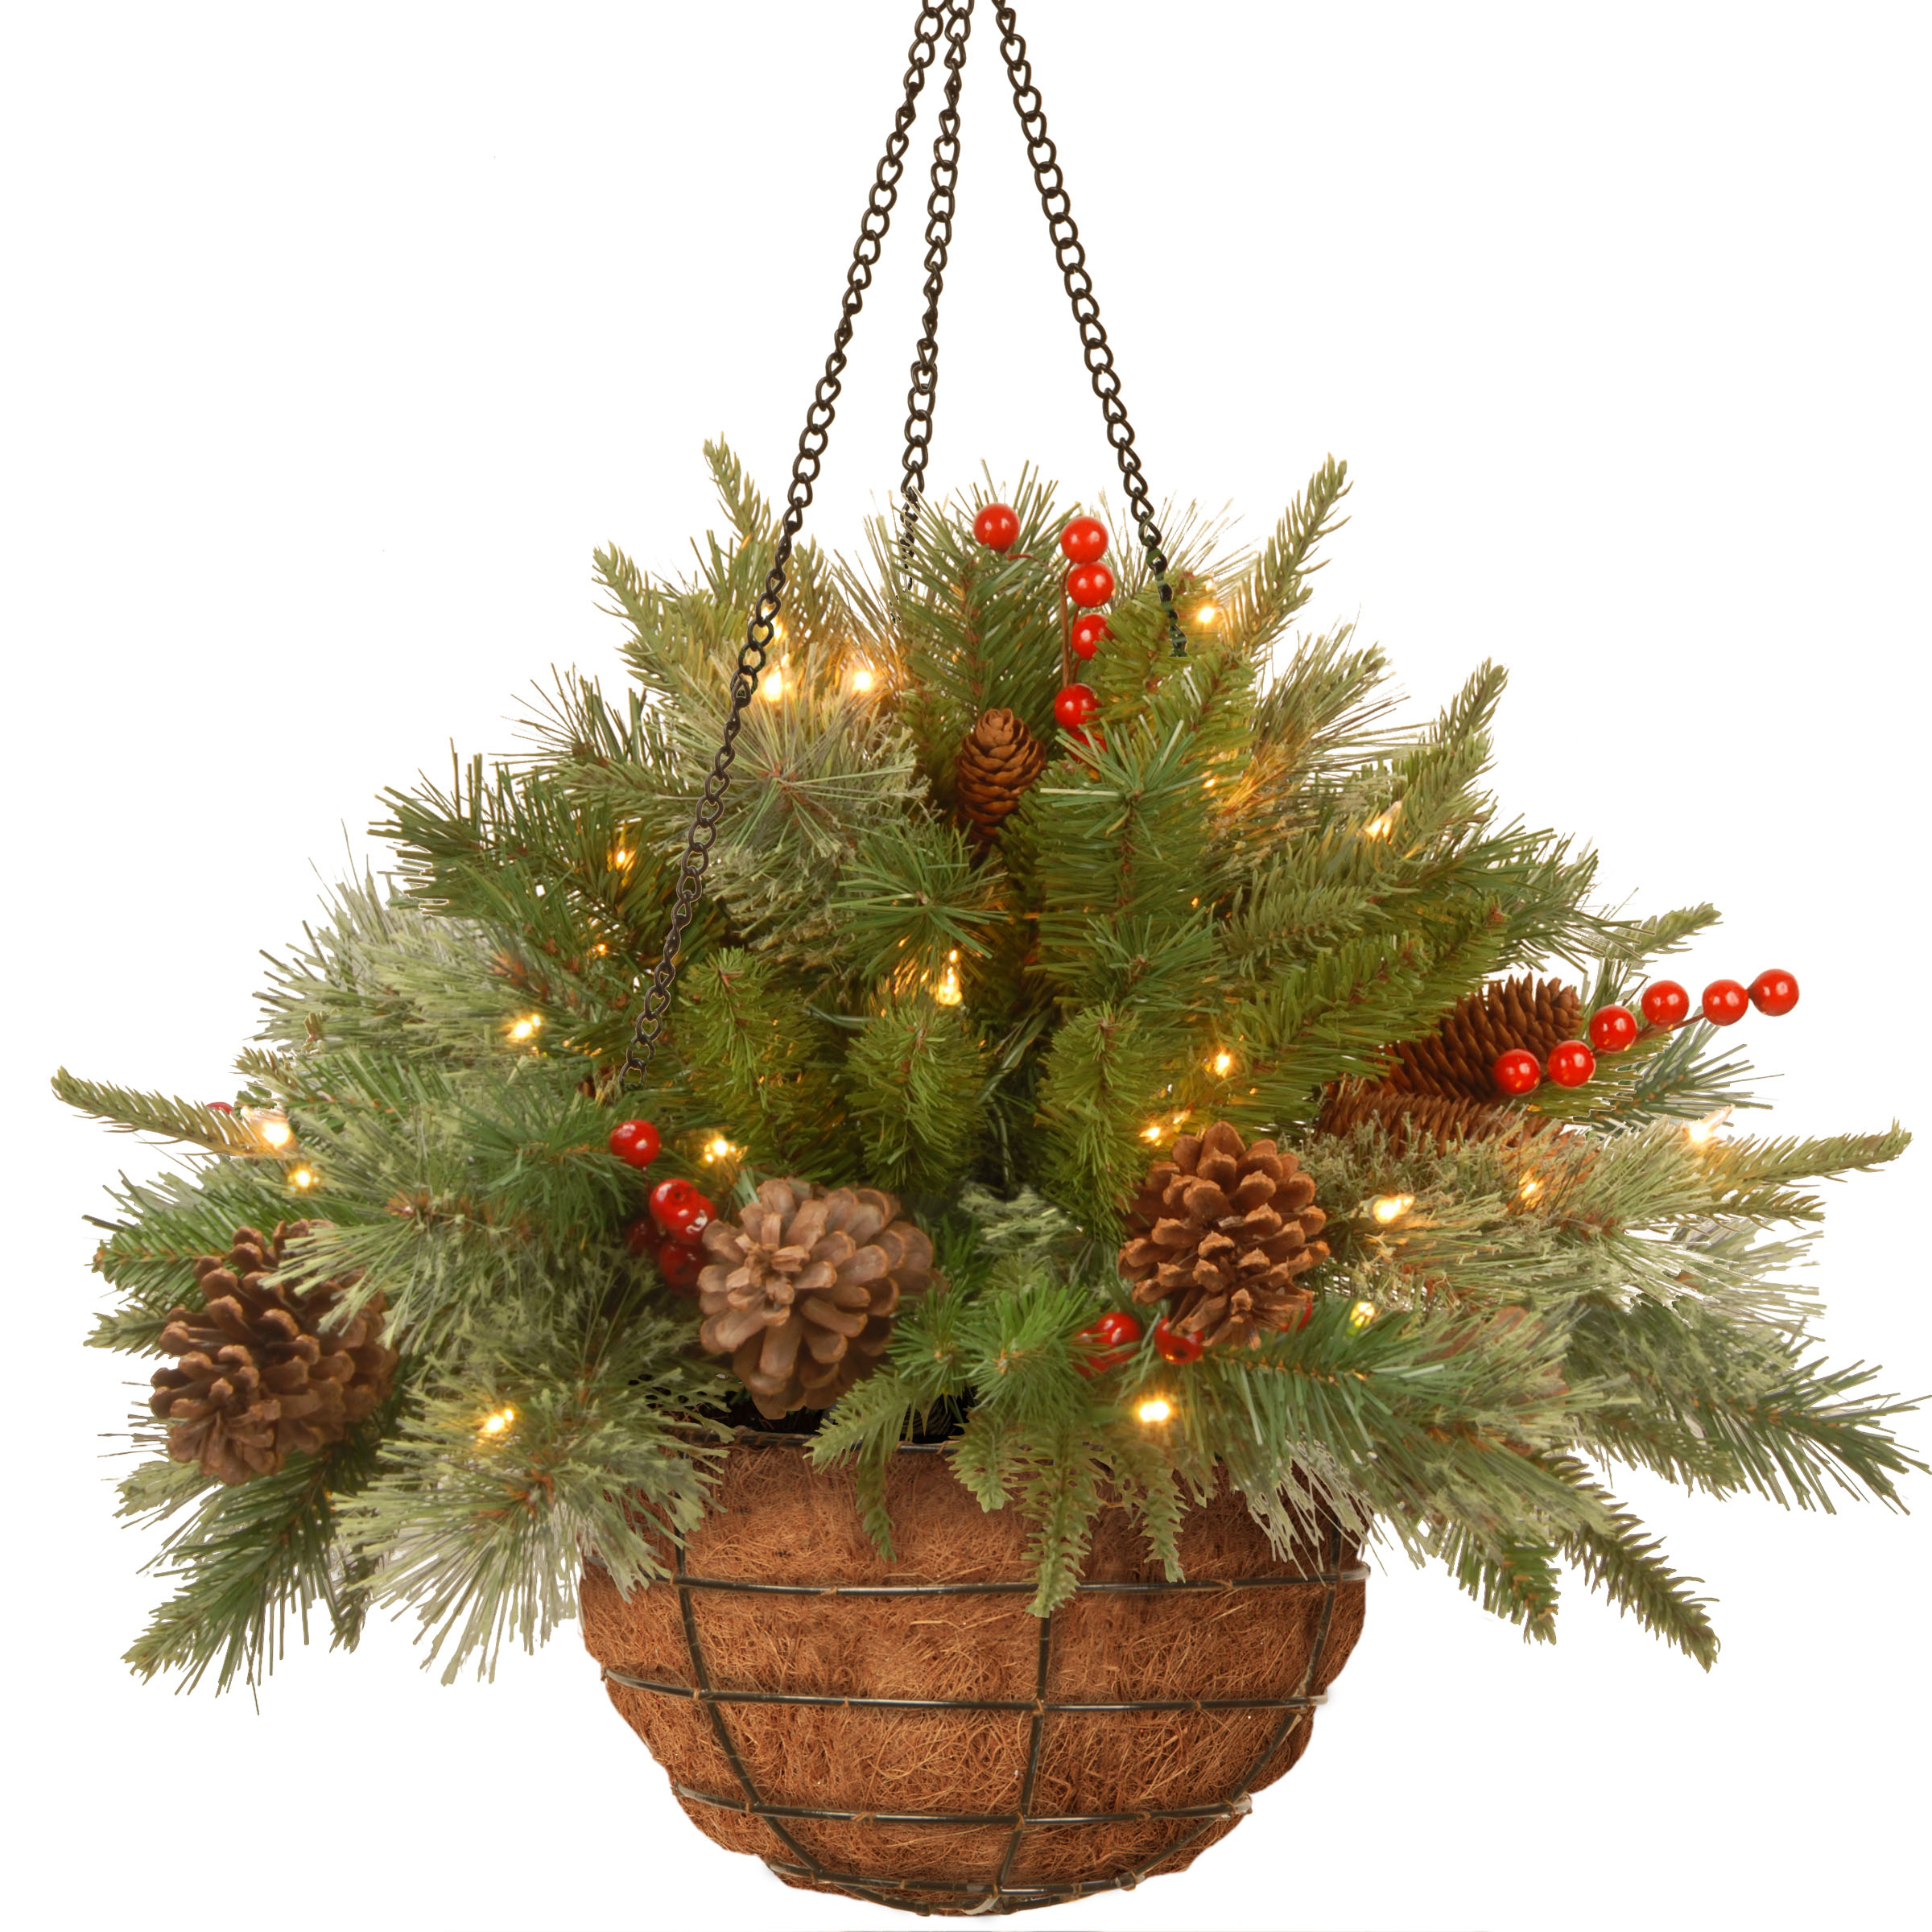 20 Inch Pe/pvc Colonial Hanging Basket: Cones, Berries & Clear Leds